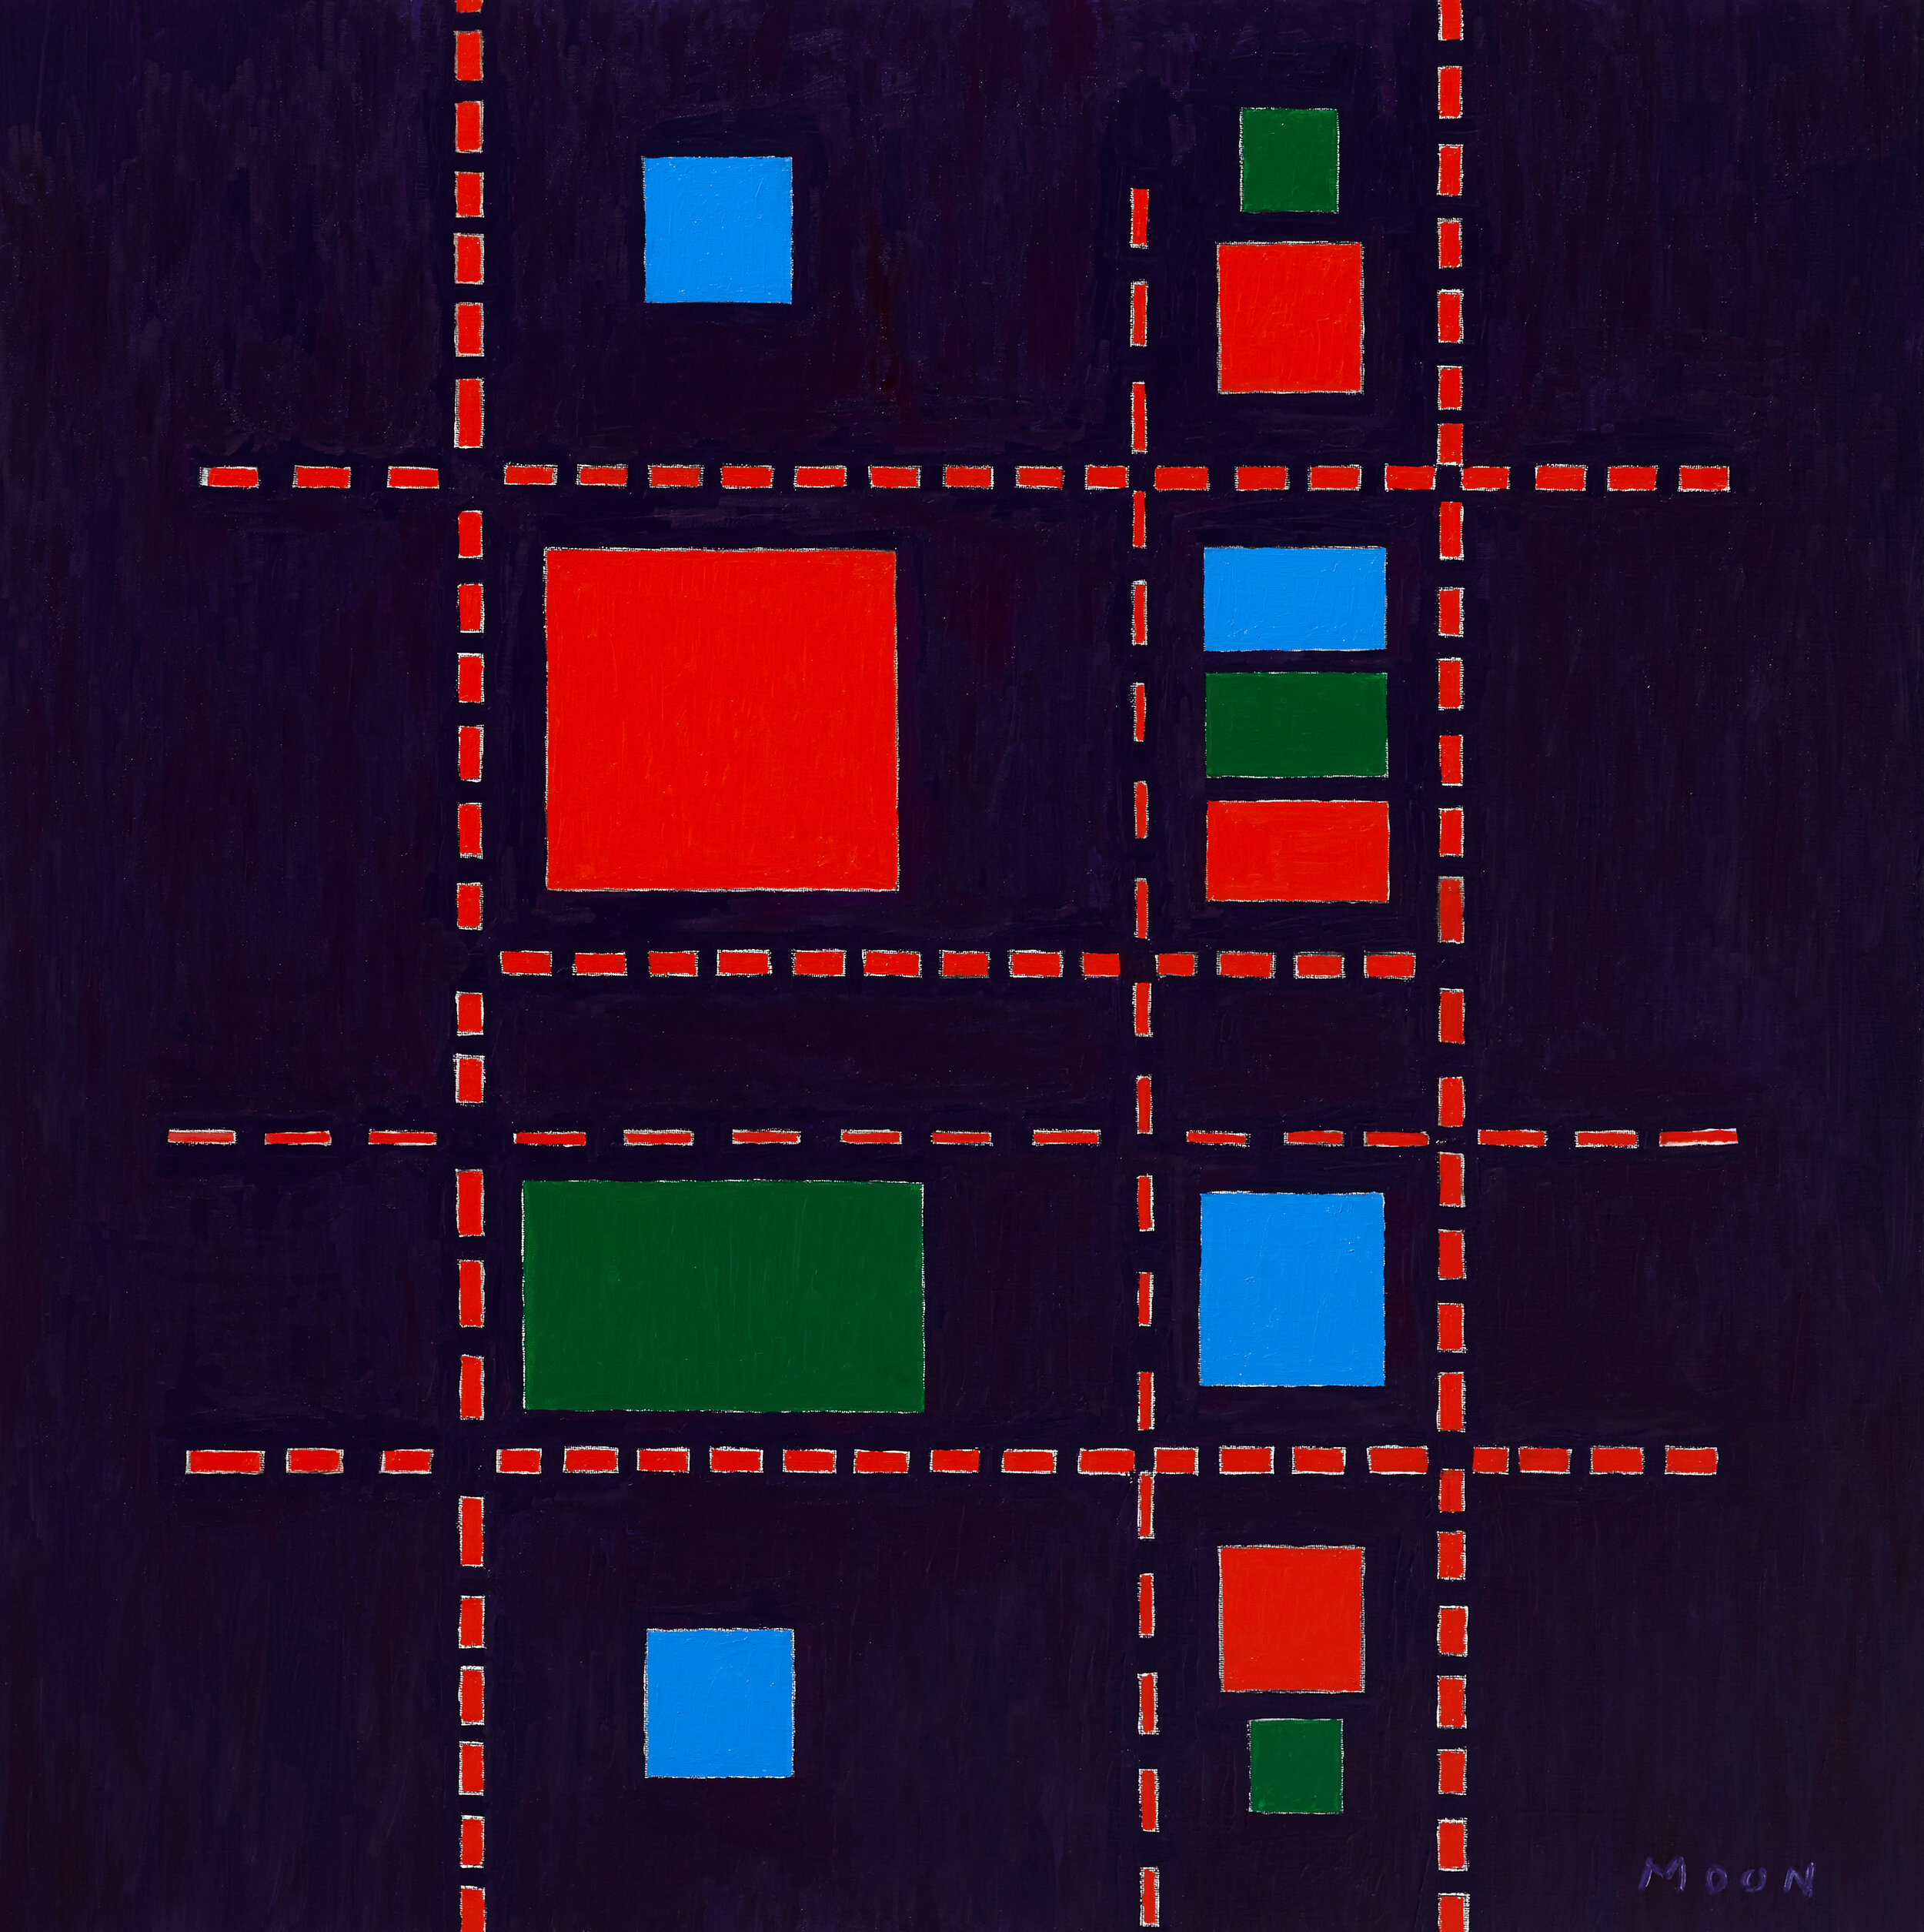 Composition of red green blue 004 Oil oncanvas 80x80(cm)2019_1188.jpg